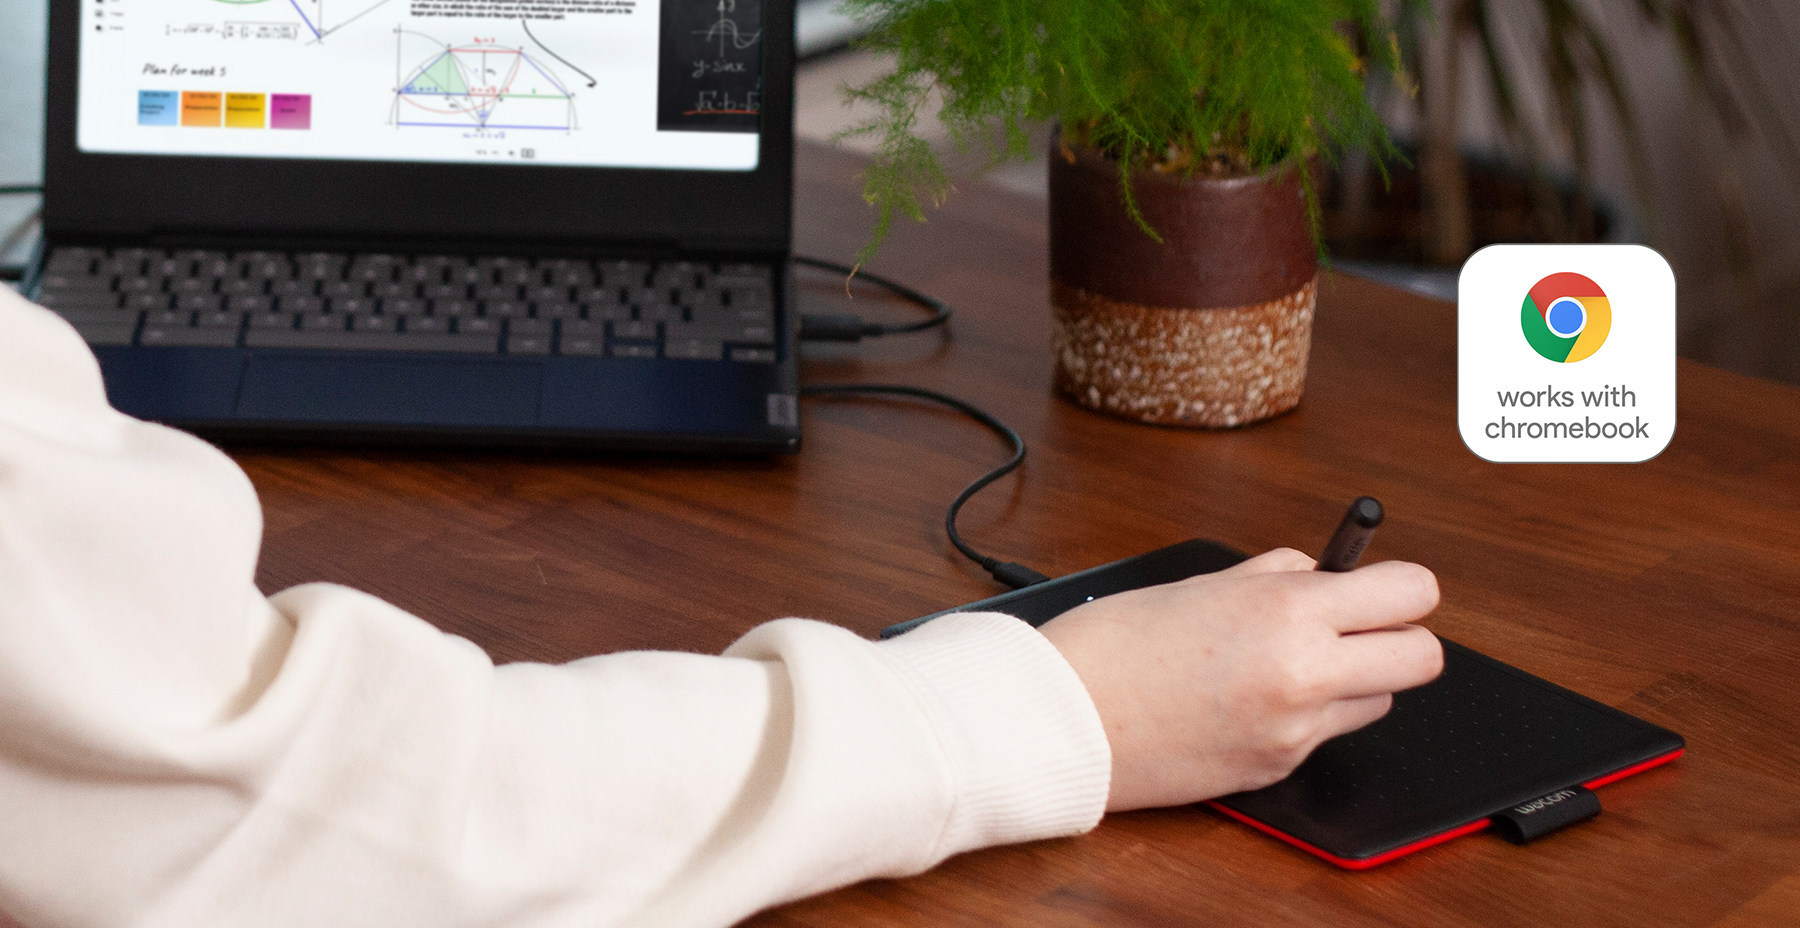 No stylus for your Chromebook? The One by Wacom adds it with a drawing pad for $60